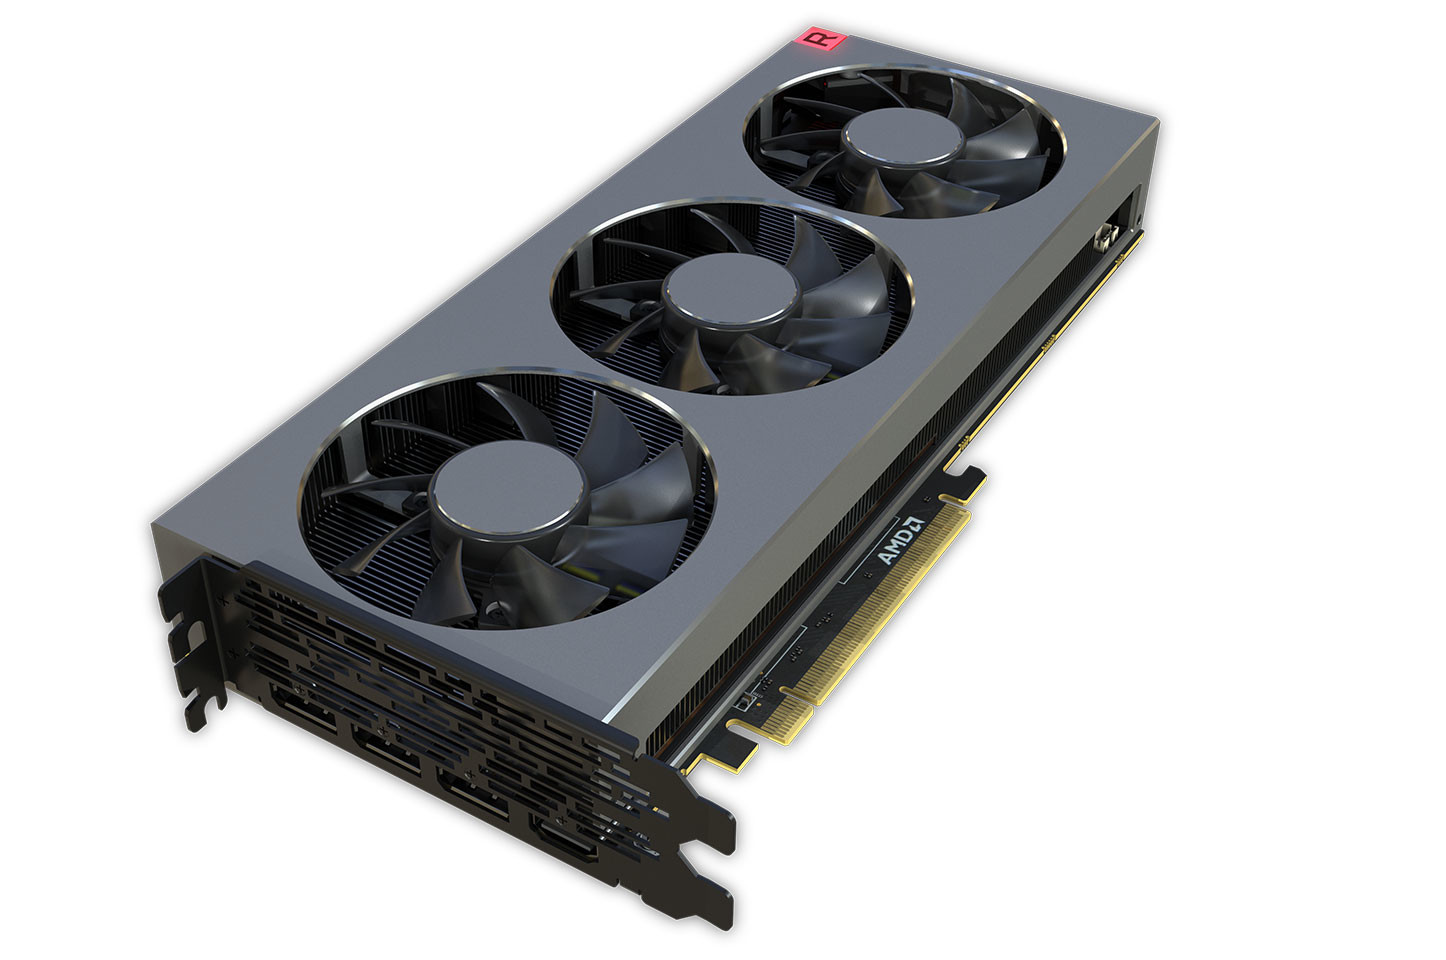 AMD's Initial Production Run of Radeon VII Just 5,000 Pieces ...